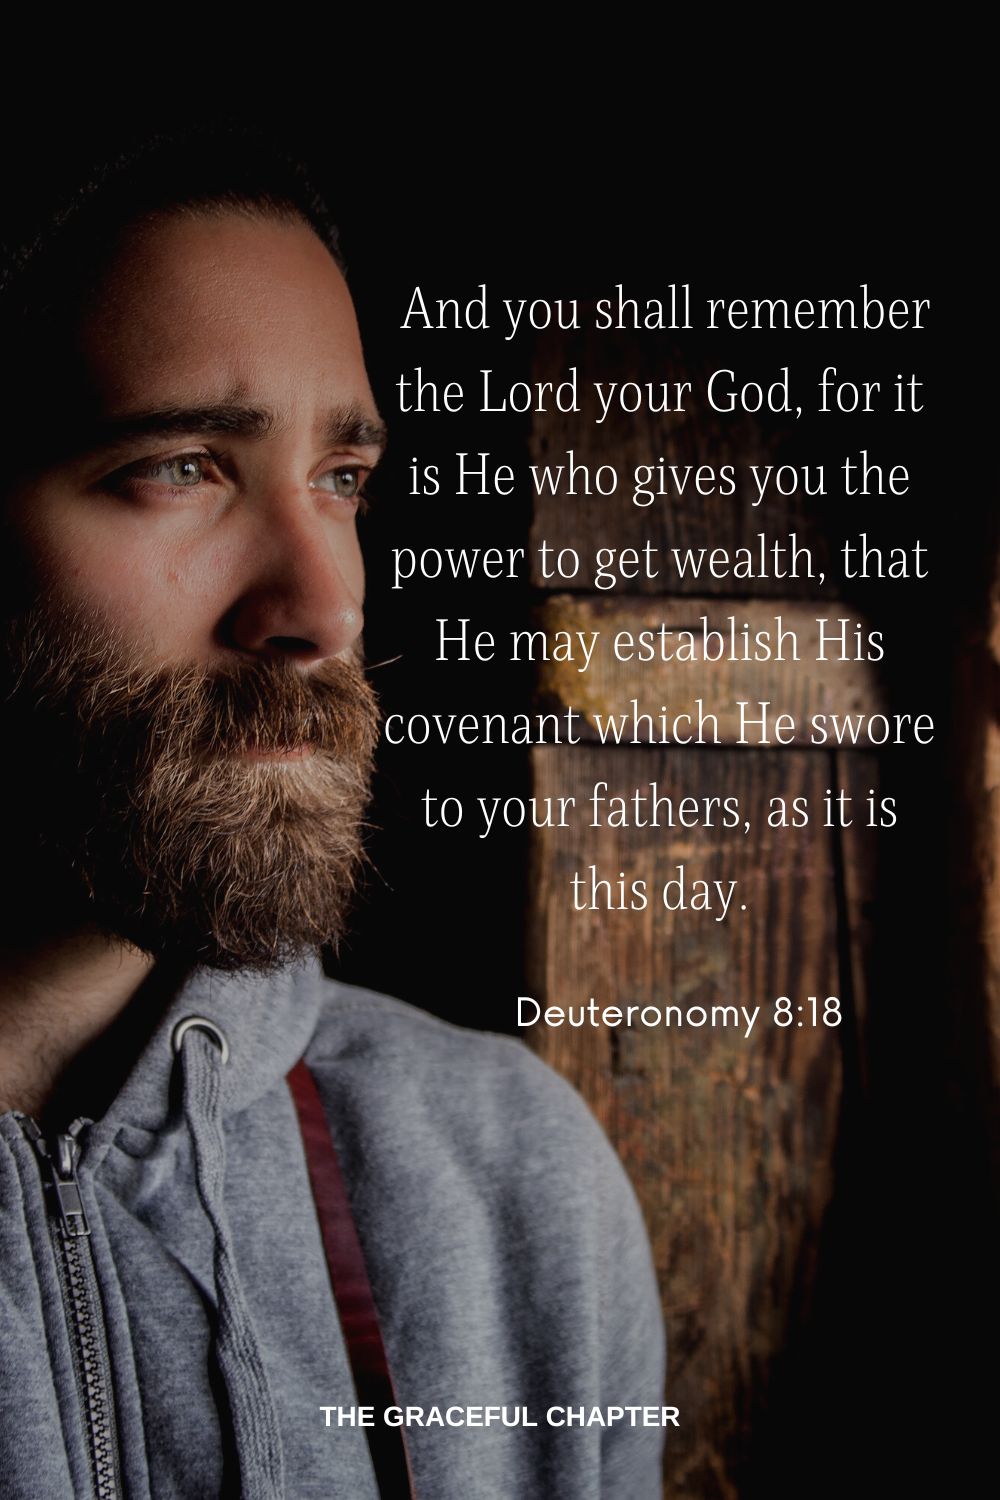  And you shall remember the Lord your God, for it is He who gives you the power to get wealth, that He may establish His covenant which He swore to your fathers, as it is this day. Deuteronomy 8:18